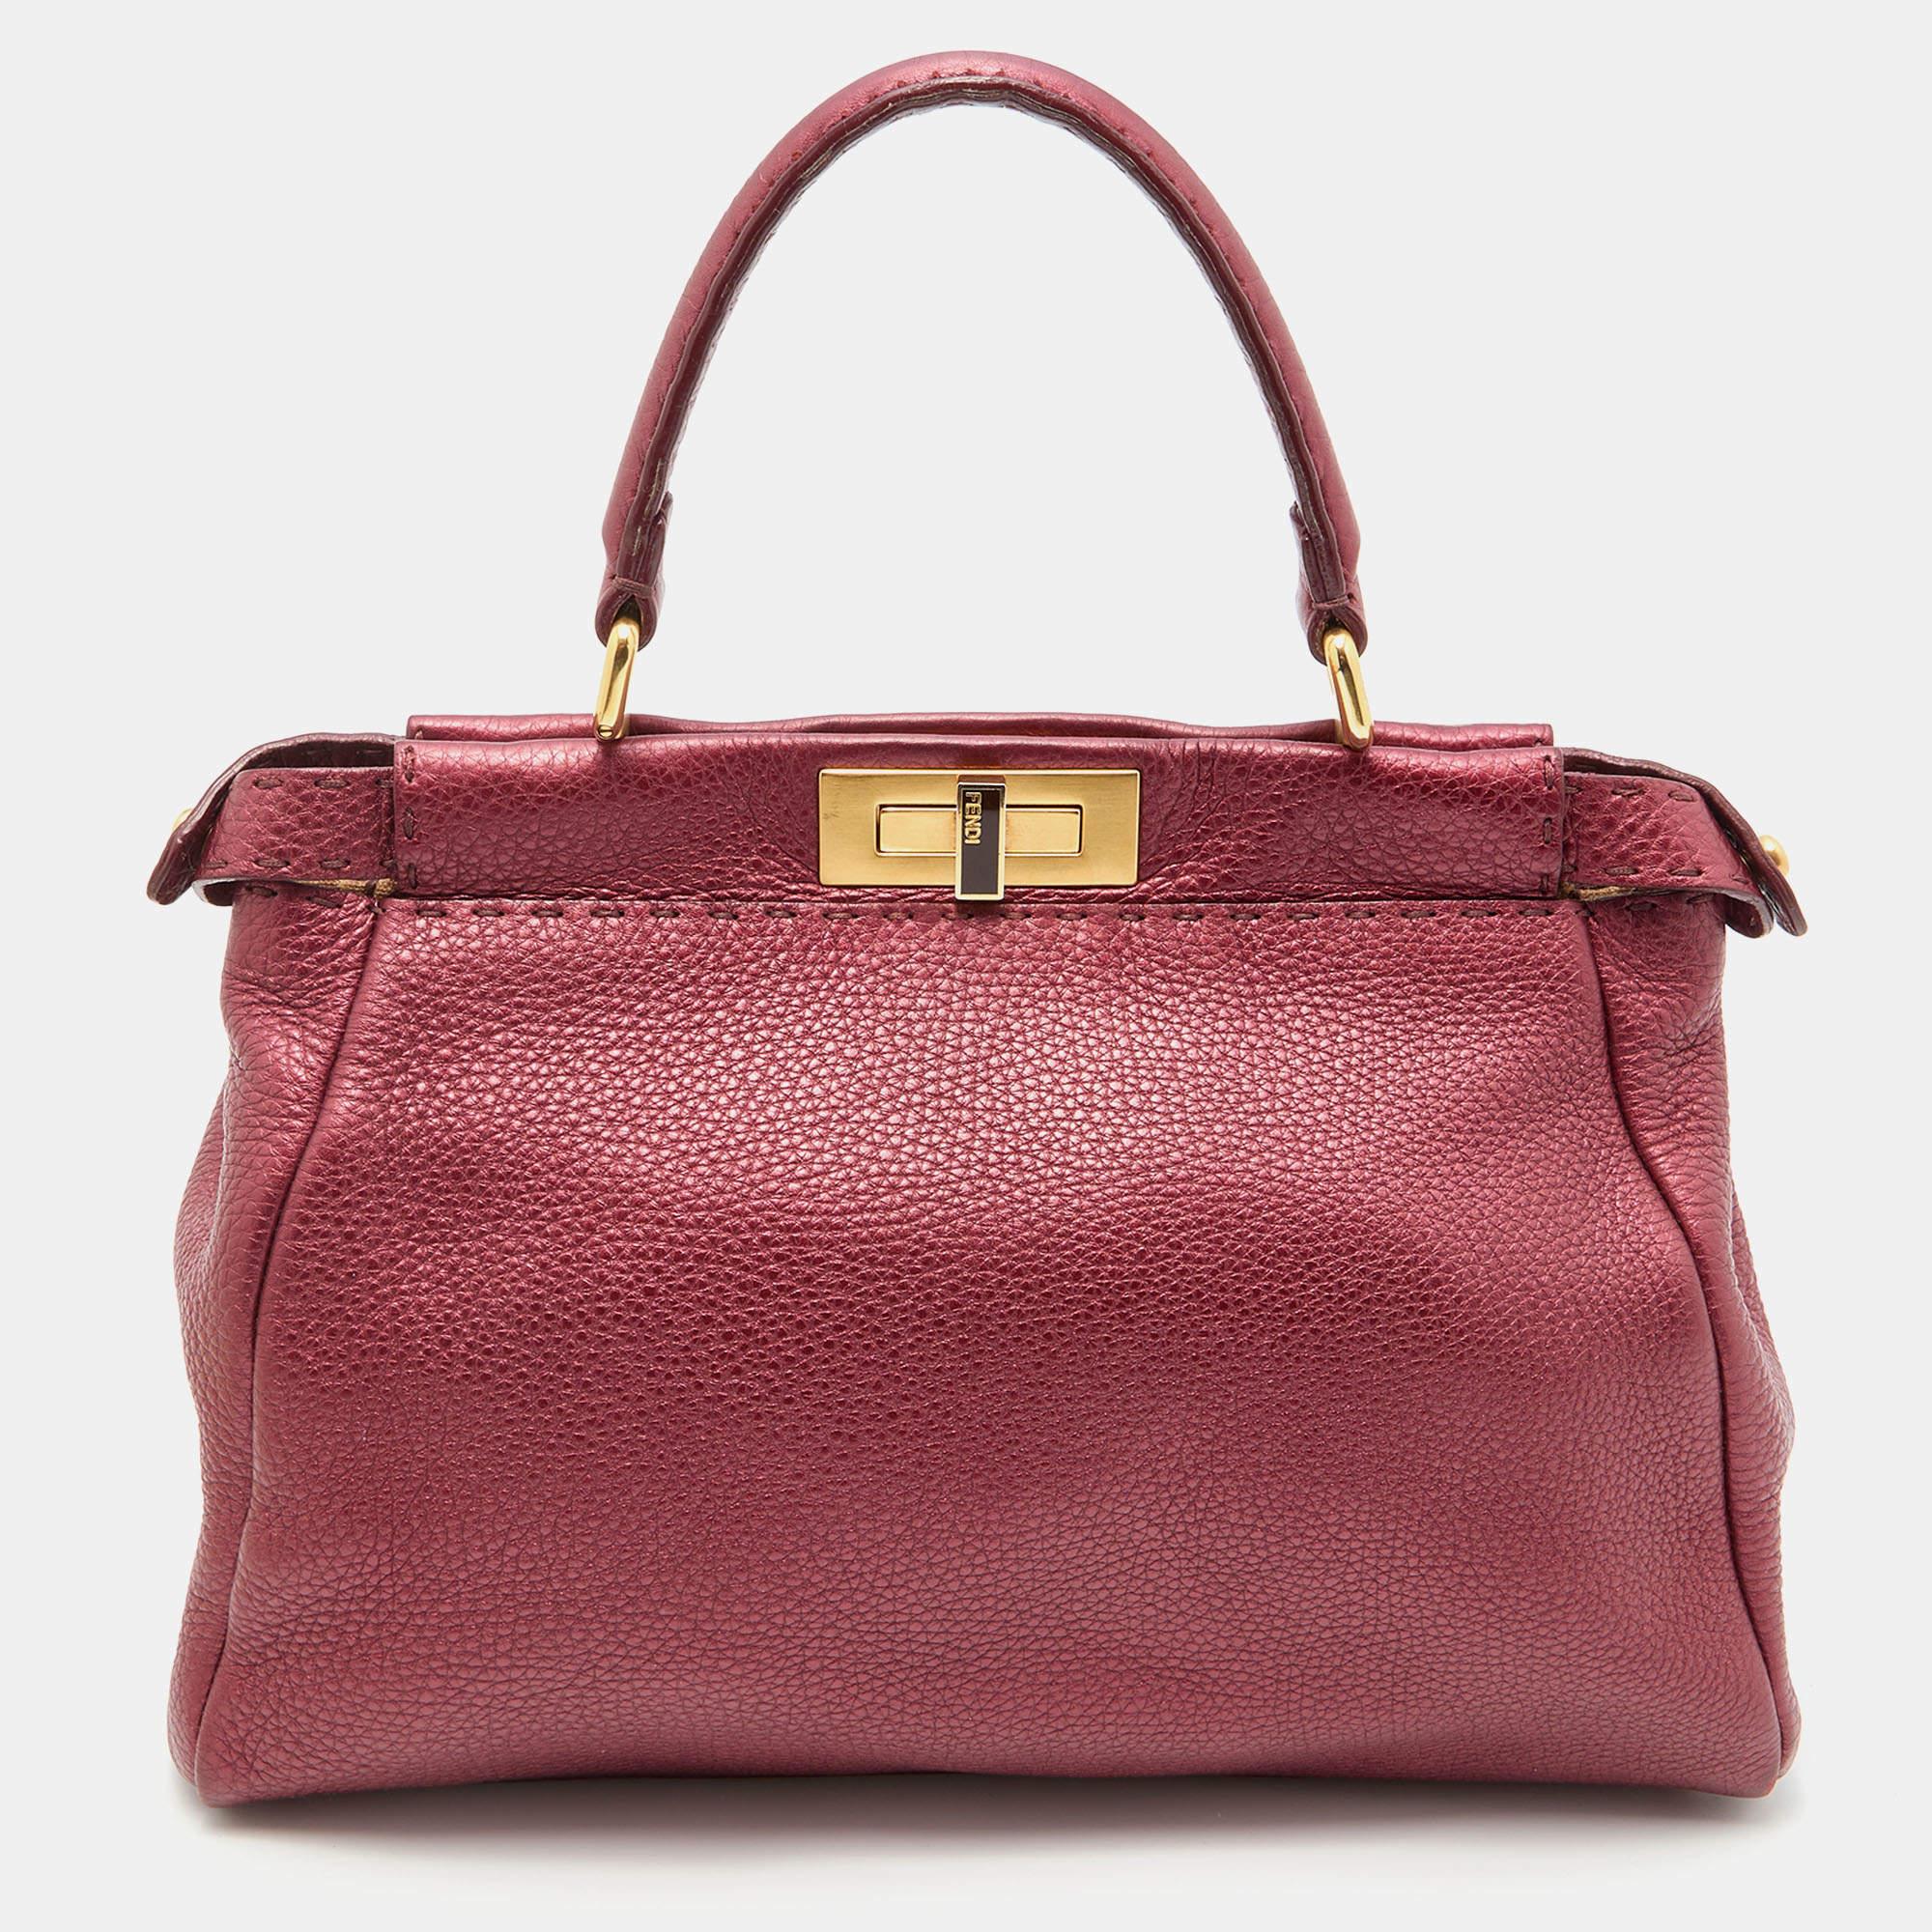 This designer bag for women is super classy and functional, perfect for everyday use. We like the notable details and its high-quality finish.

Includes: Original Dustbag, Detachable Strap

